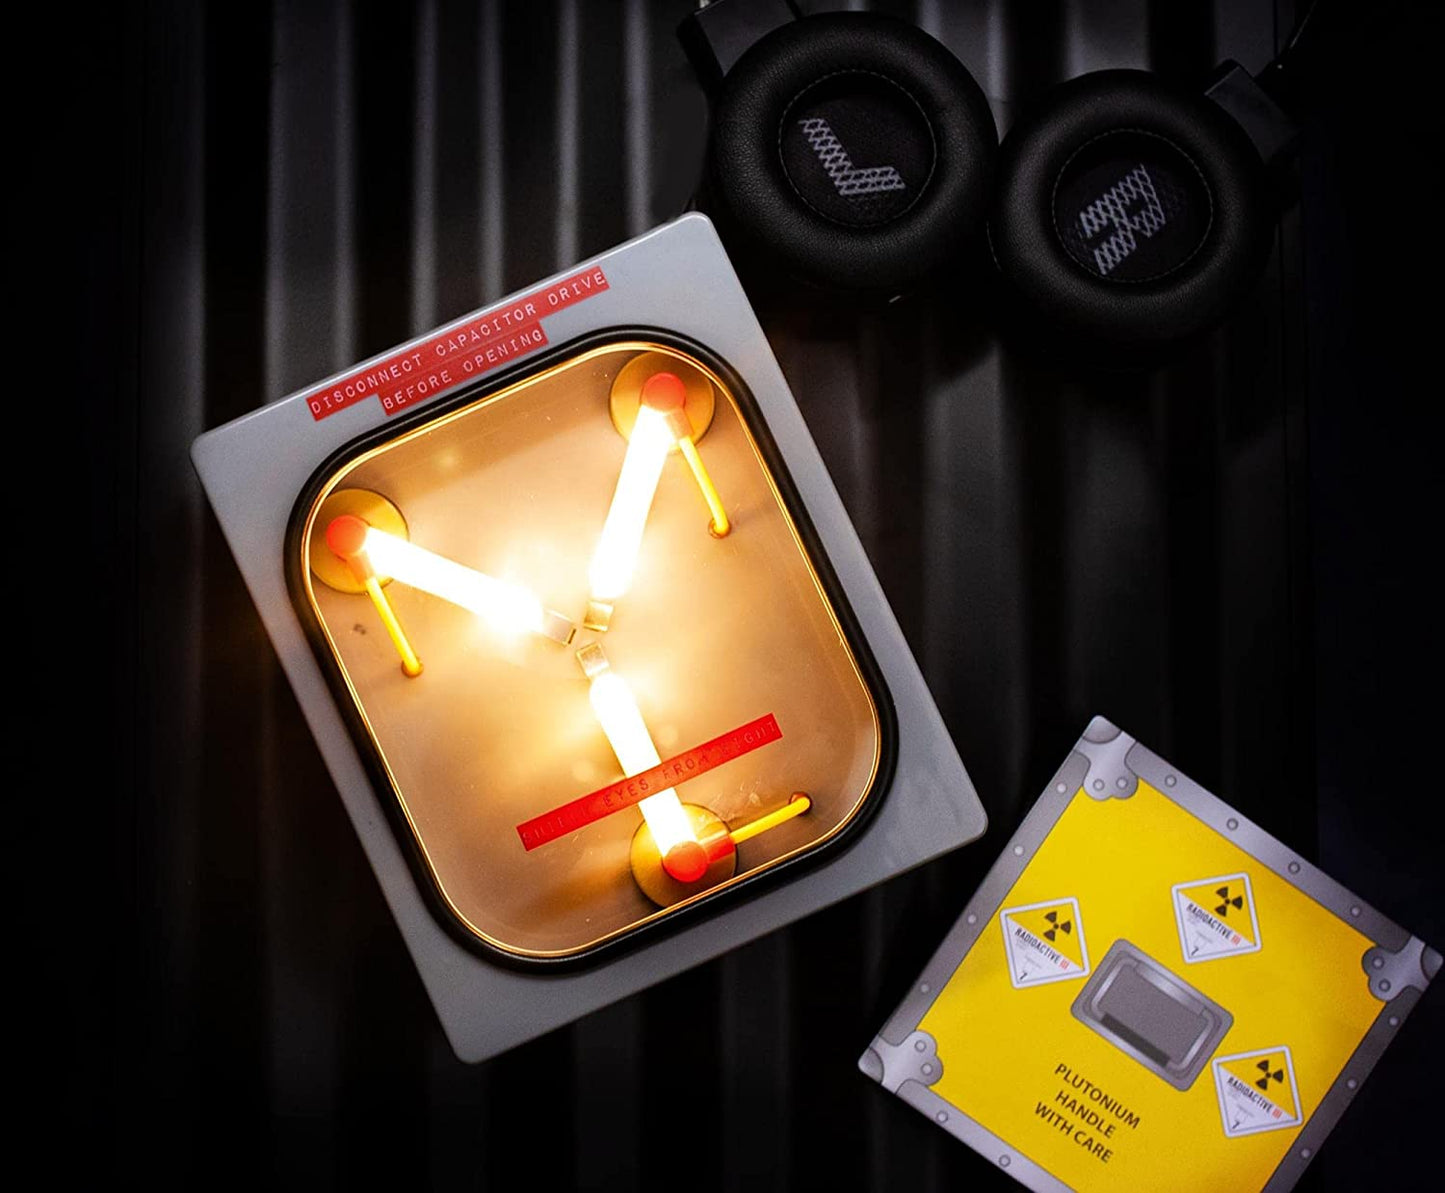 A Flux Capacitor mood light which is a replica of the flux capacitor from the movie Back to the Future.